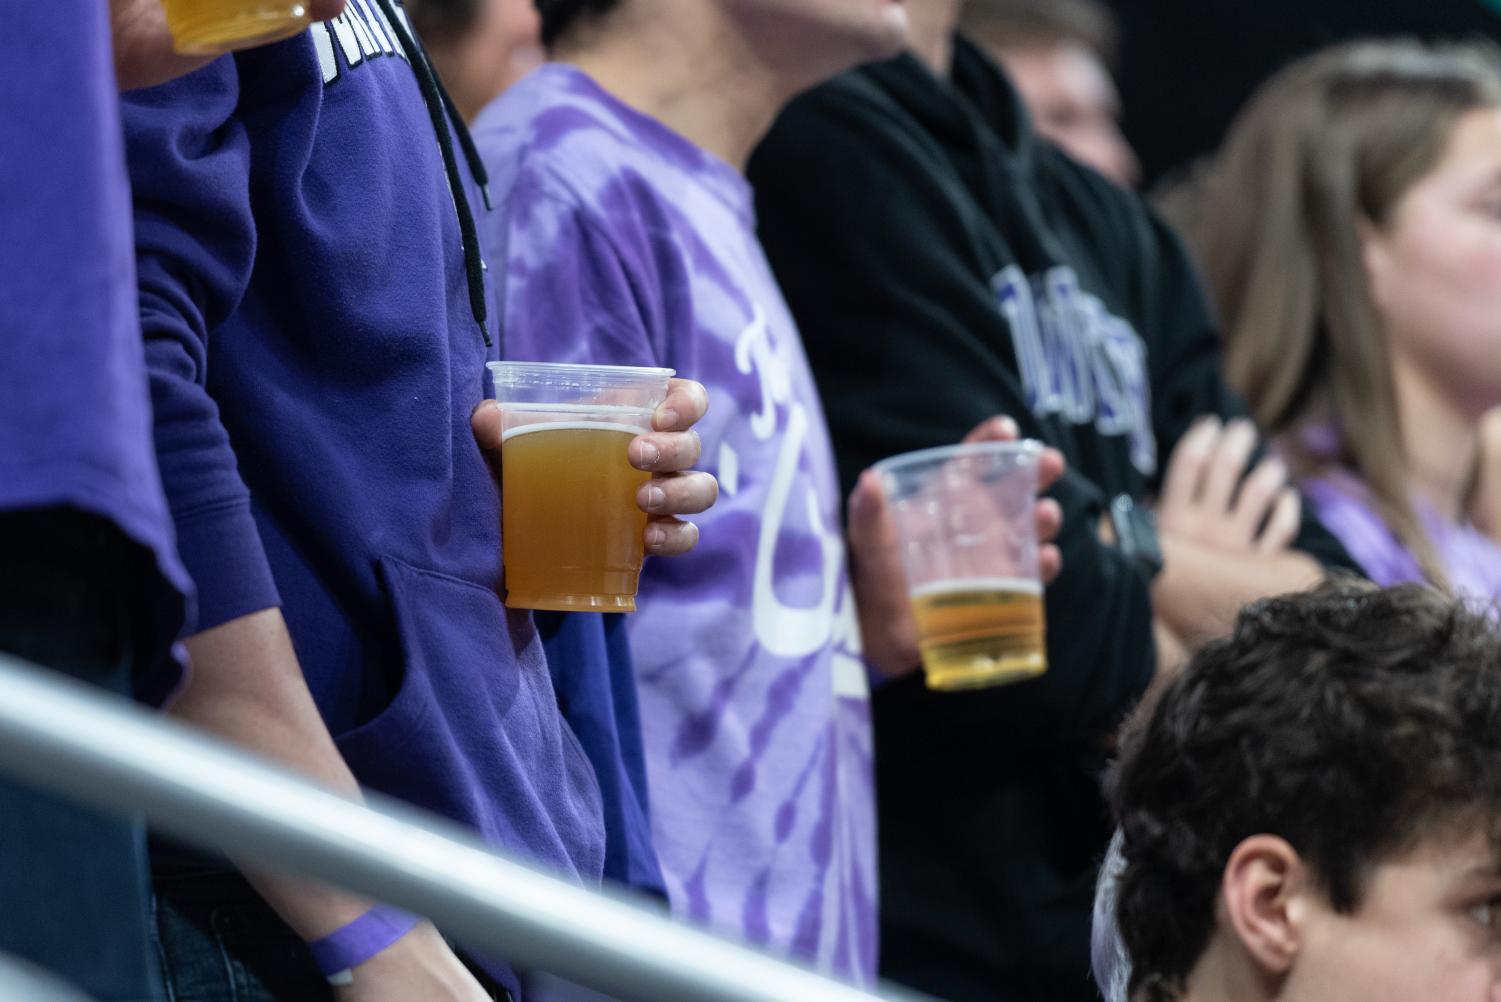 Students+in+purple+gear+hold+glasses+of+beer.